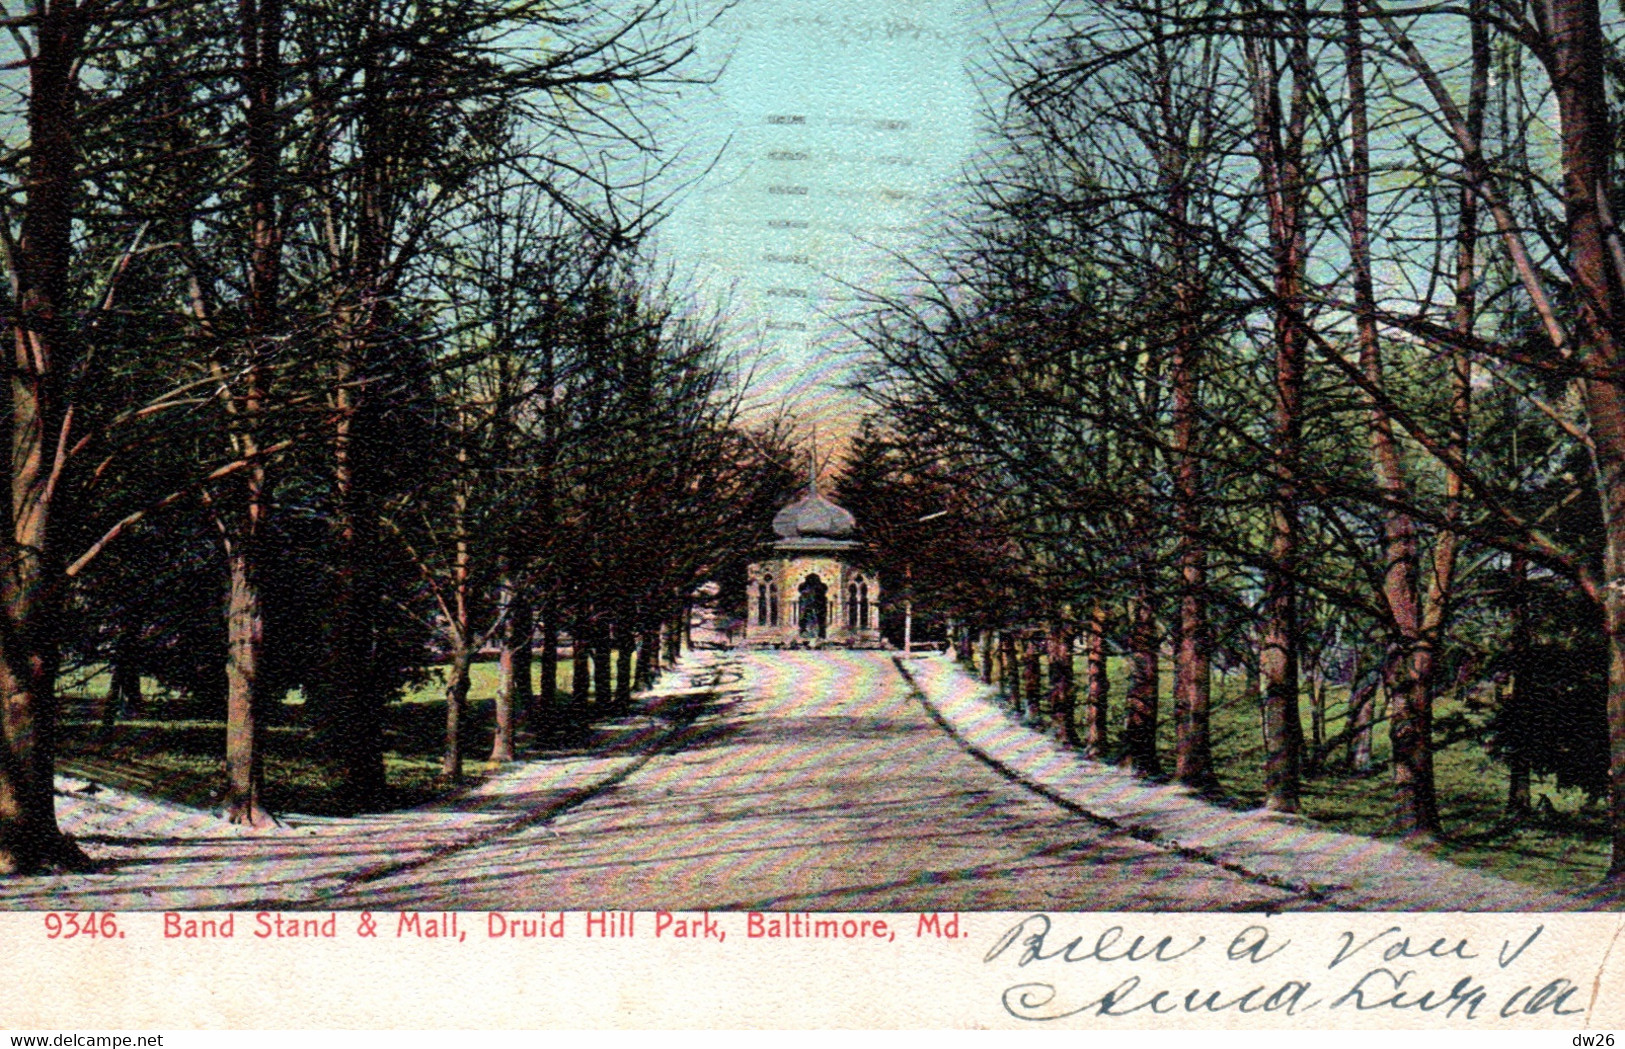 Band Stand & Mall, Druid Hill Park, Baltimore - Maryland MD - Post Card N° 9346 - Baltimore